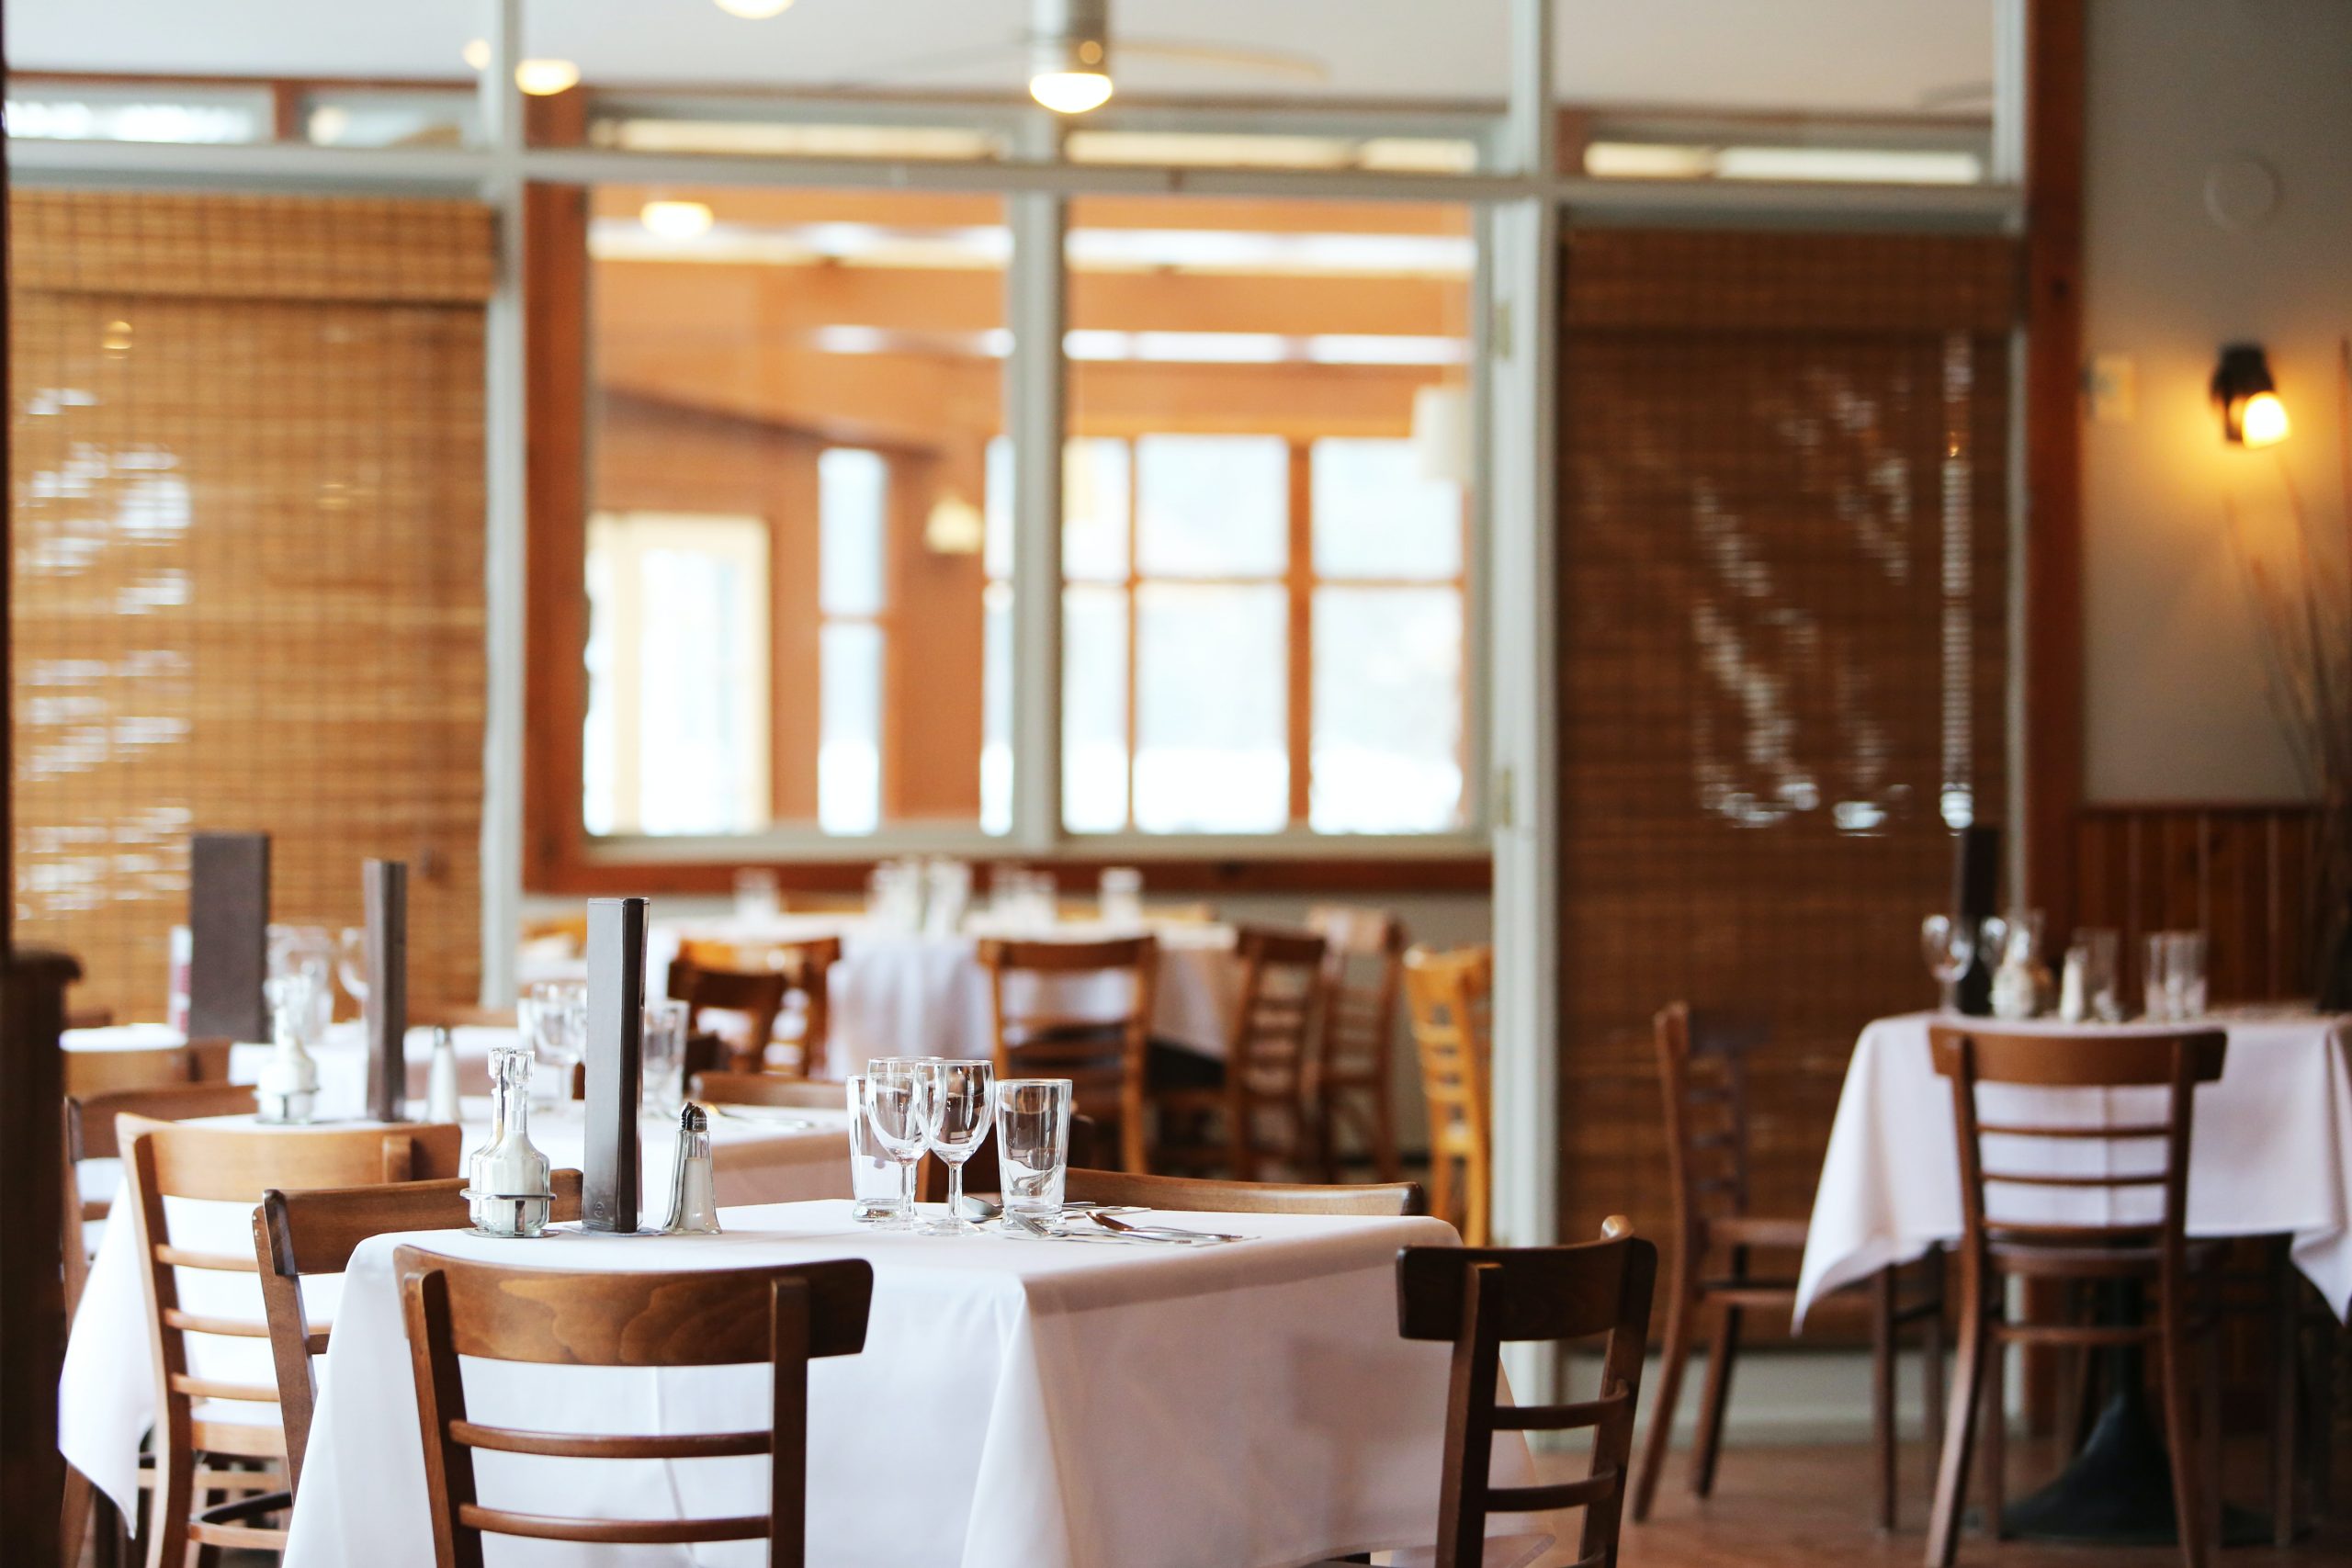 Restaurant Accounting Services in Northern Virginia